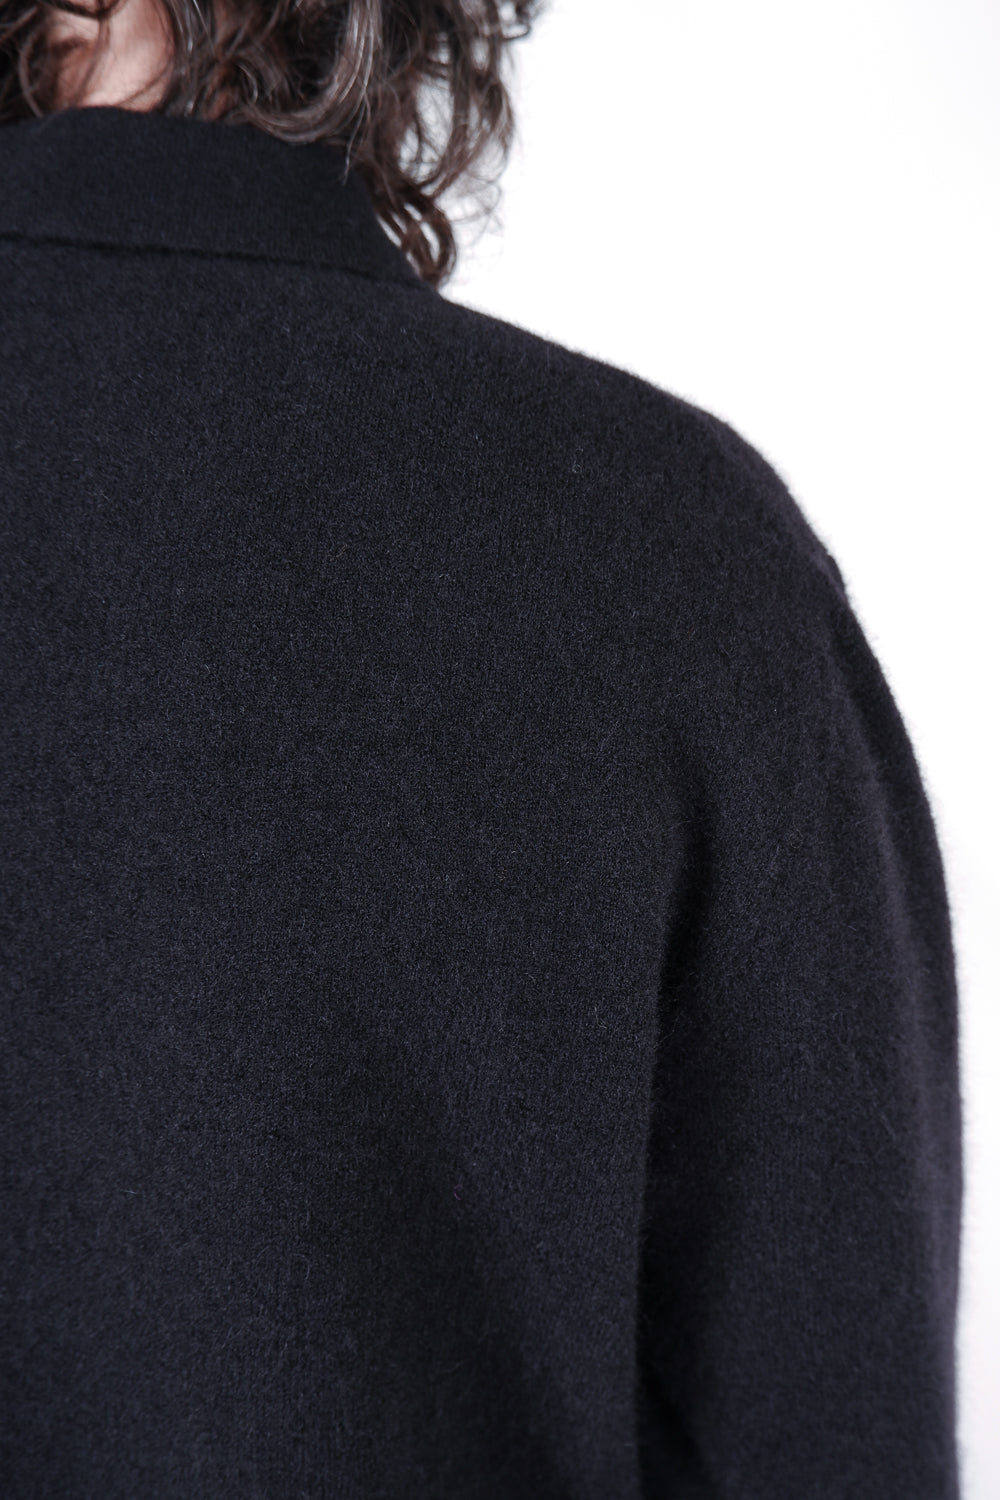 Buy the Daniele Fiesoli Alpaca Mixed Wool L/S Polo in Black at Intro. Spend £50 for free UK delivery. Official stockists. We ship worldwide.